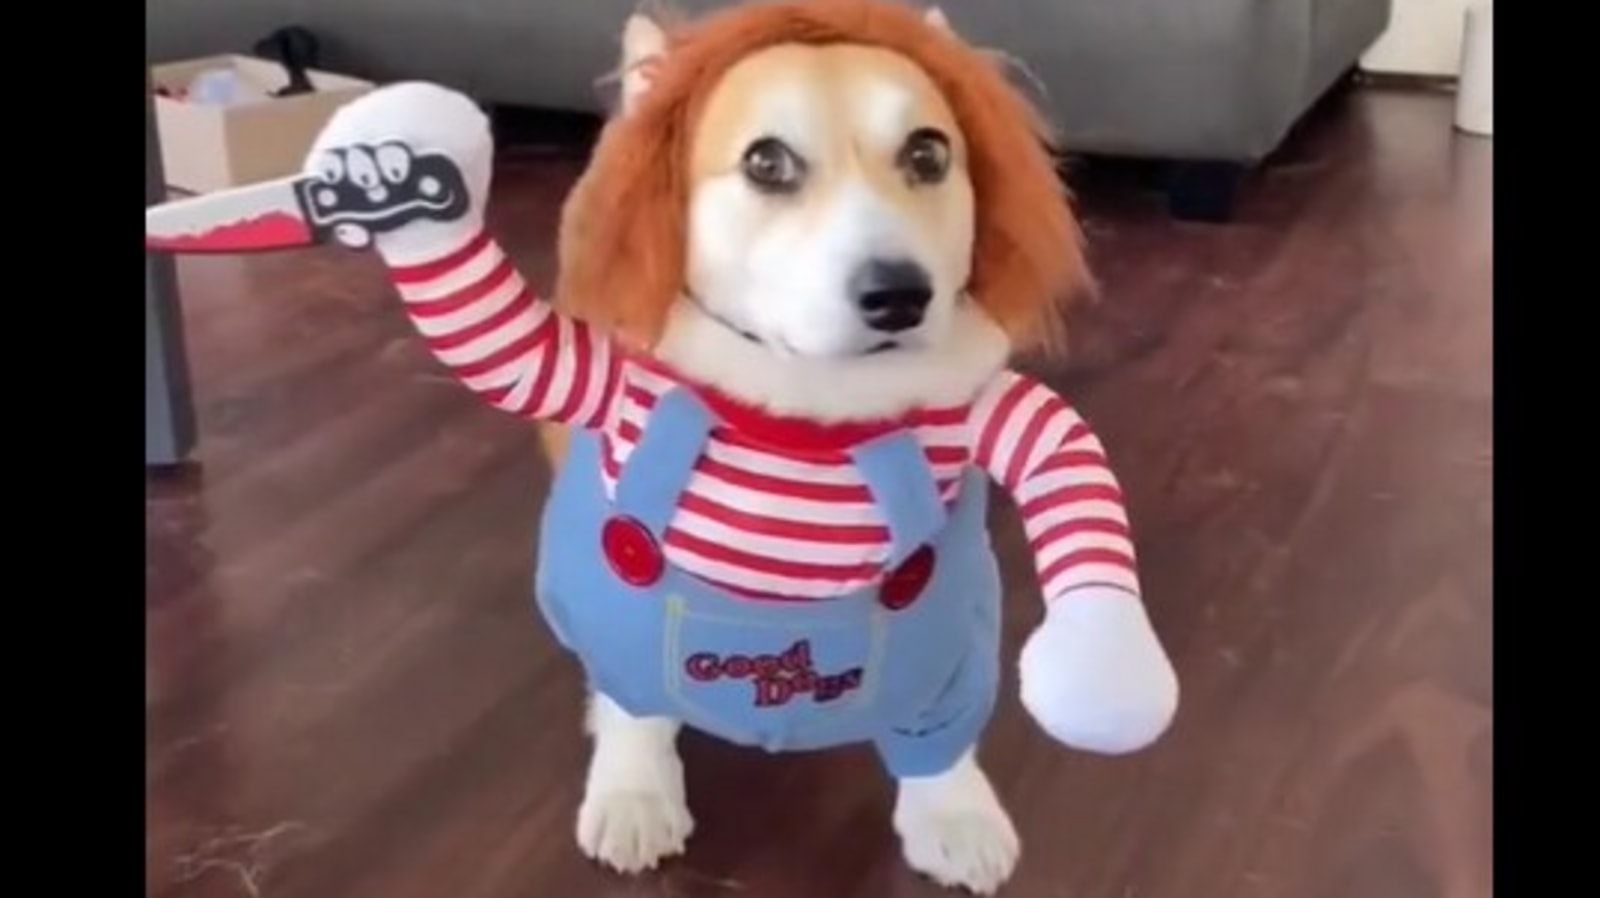 Halloween Dog Costumes Funny Pet Chucky Costume with Arms